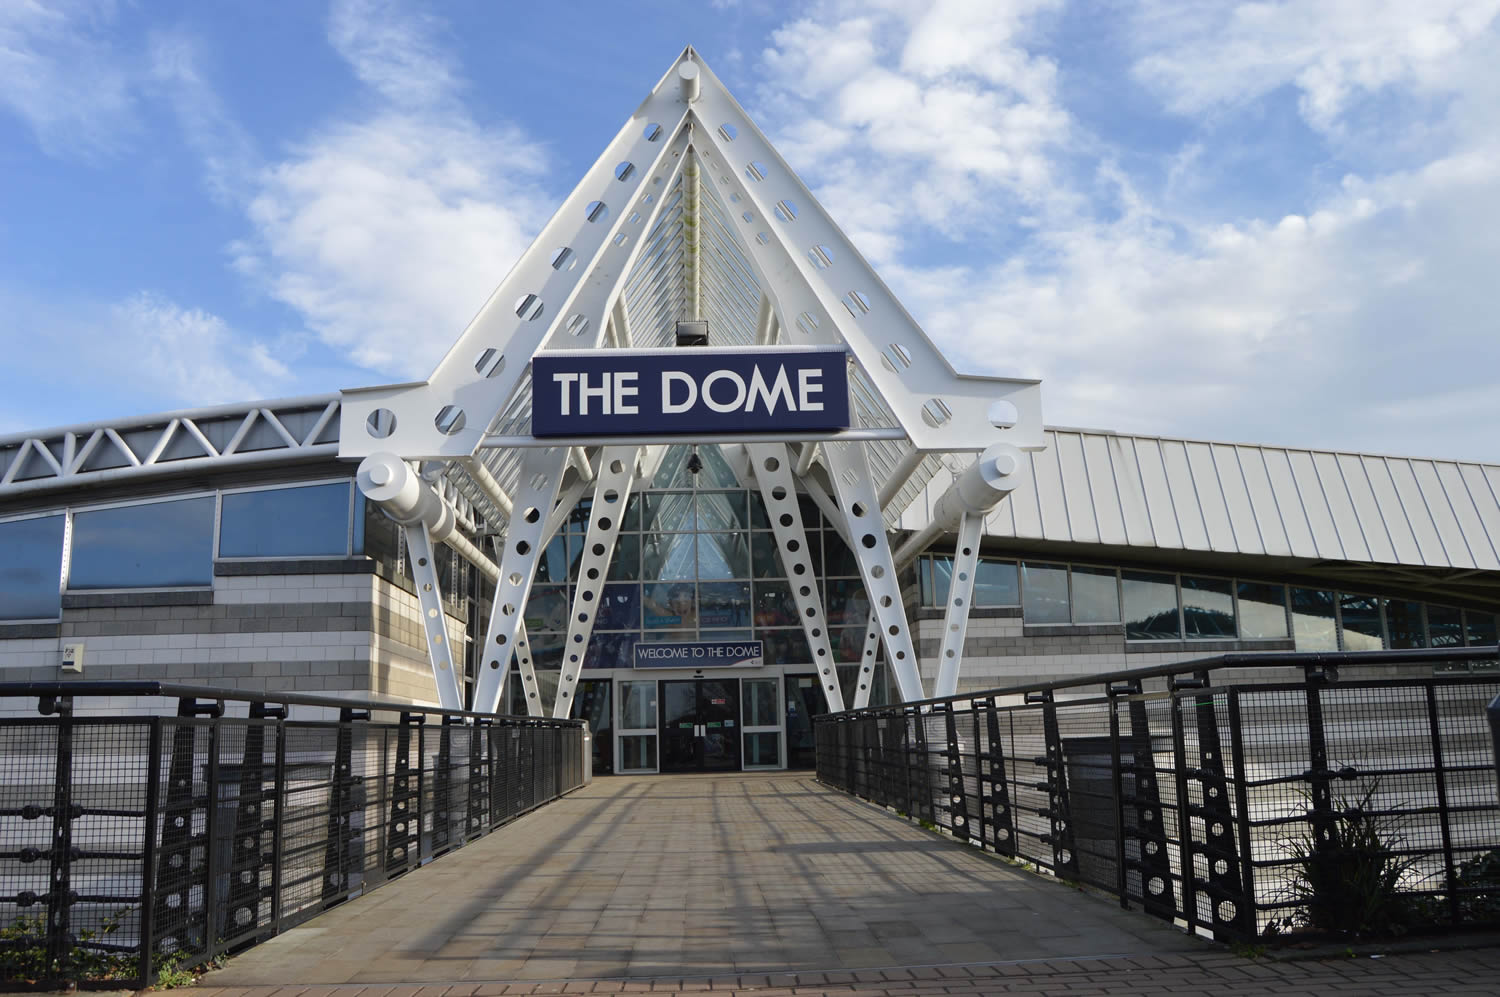 Image name Doncaster Dome the 5 image from the post Visitor Attractions in Yorkshire.com.